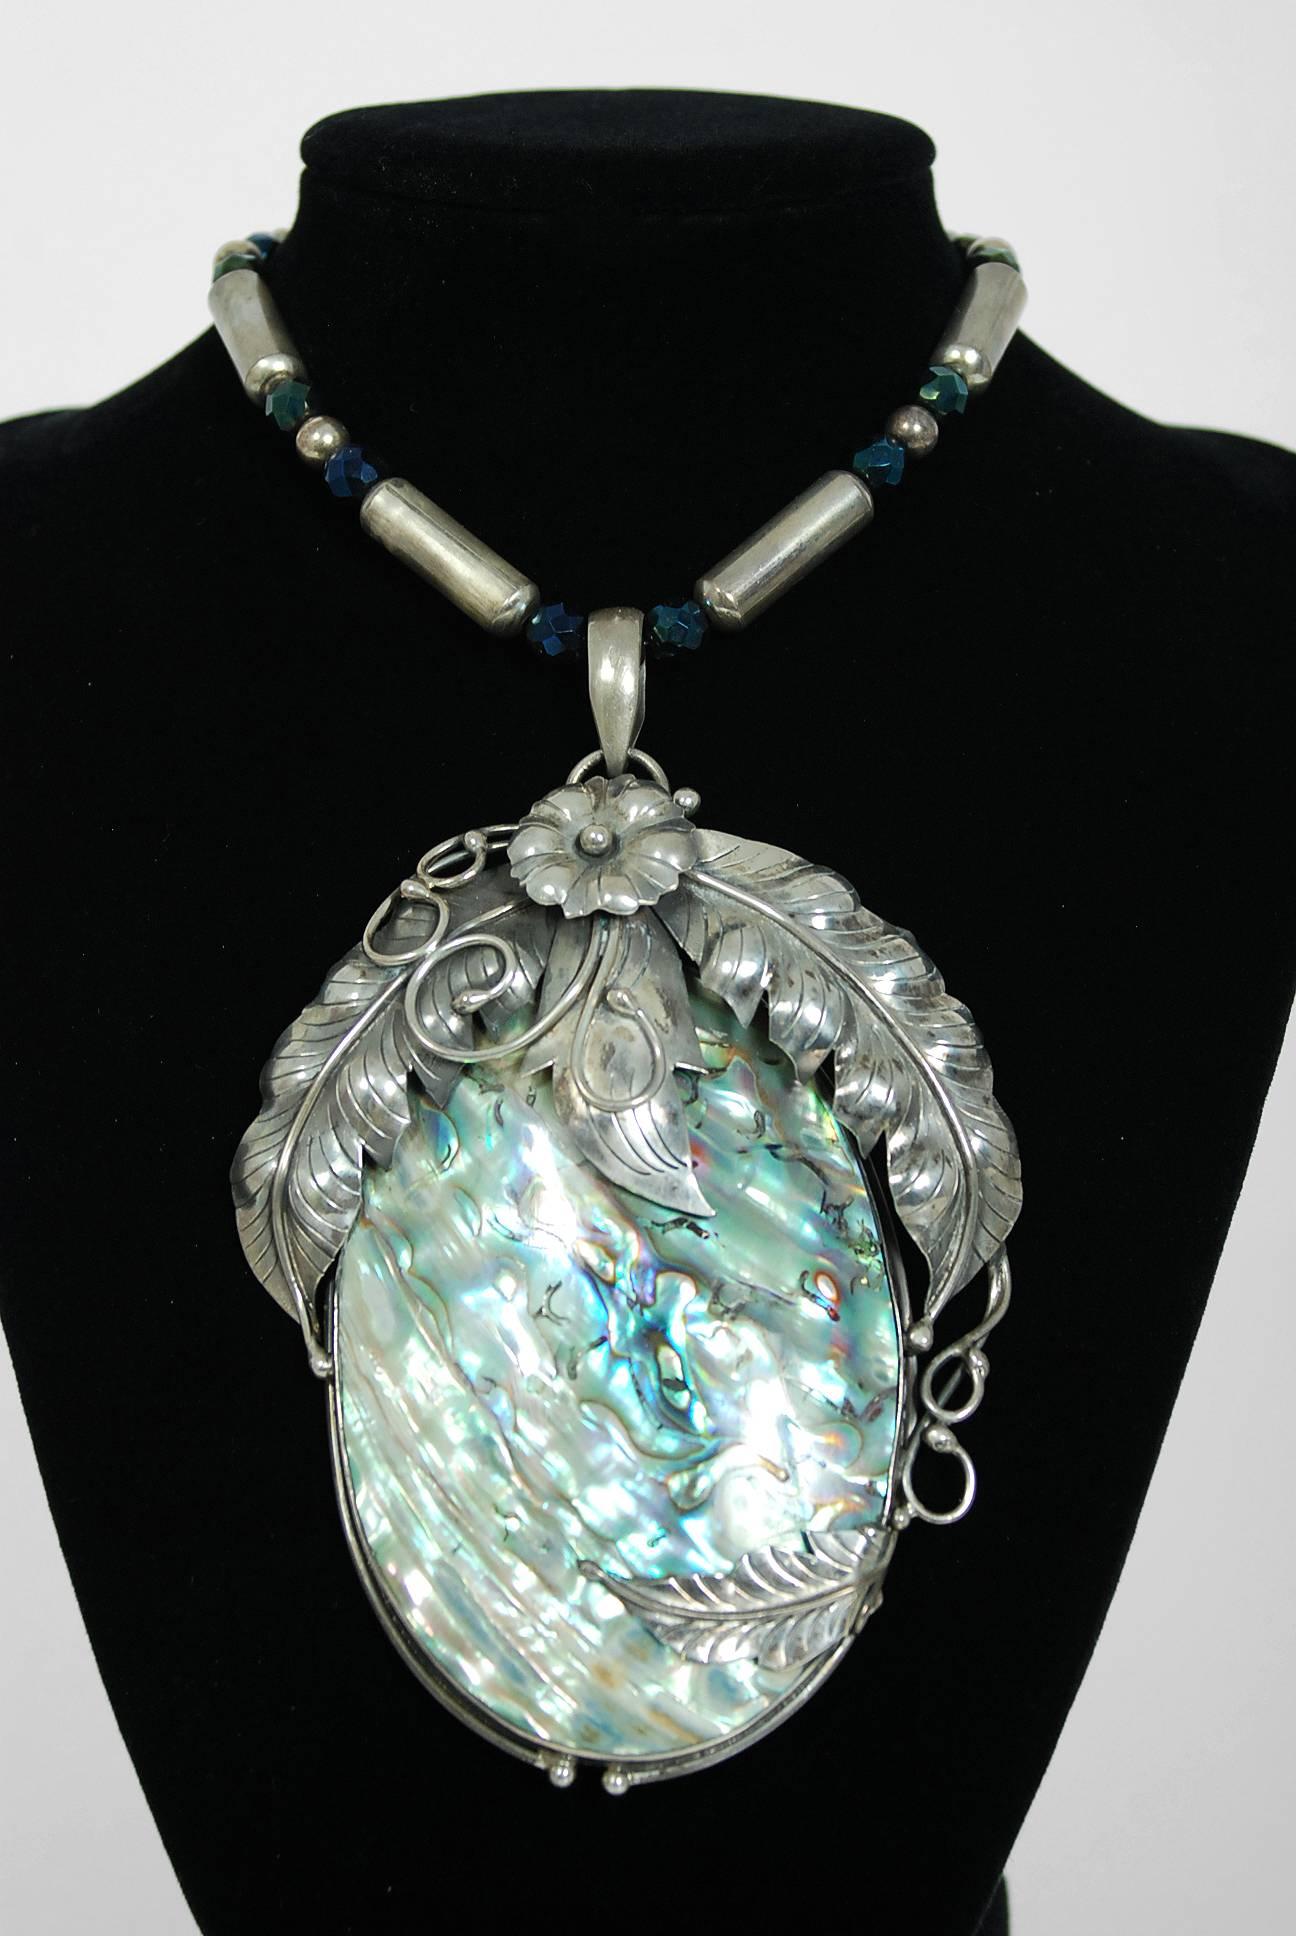 Gorgeous Native American rainbow abalone and genuine sterling silver huge statement necklace dating back to the mid 1970's. The piece has been crafted in a stunning feather motif with texture to showcase the over-sized pendant. The abalone 'sea